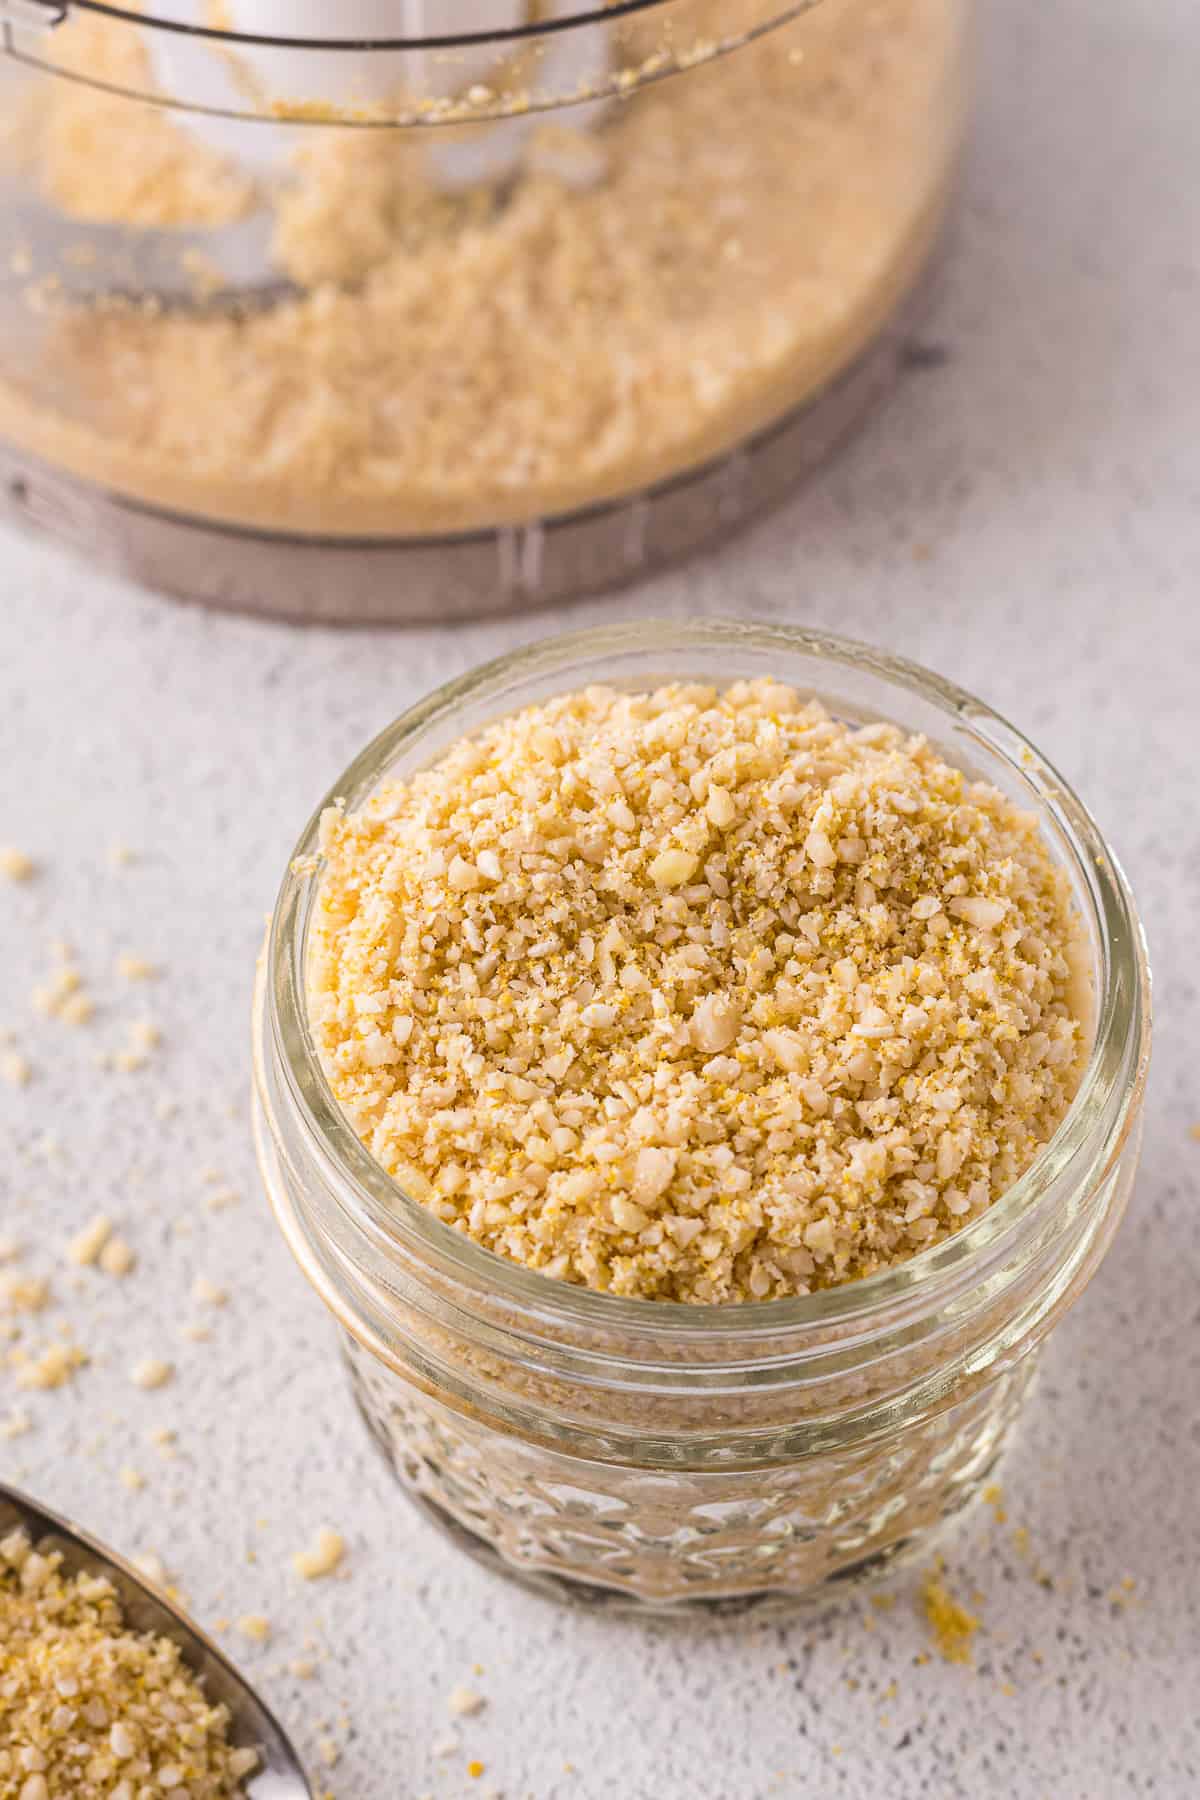 Dairy-free parmesan cheese in a glass jar.